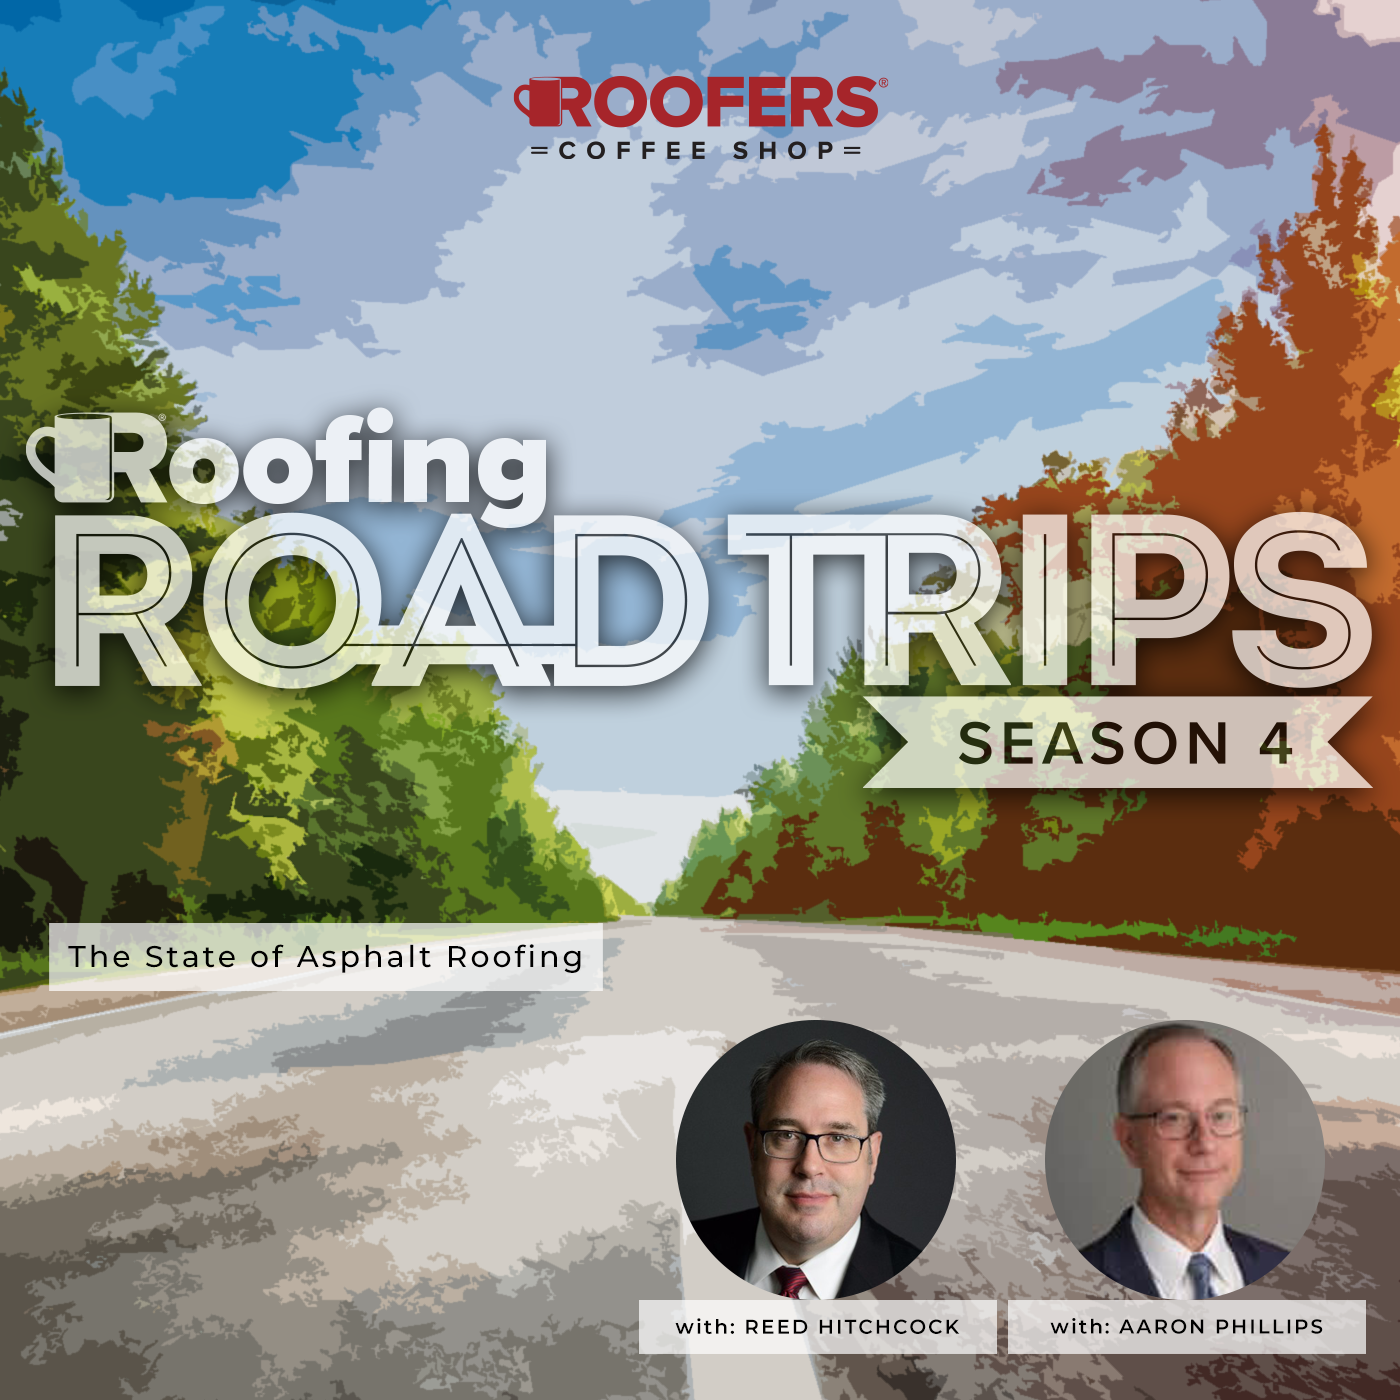 Reed Hitchcock and Aaron Phillips - The State of Asphalt Roofing